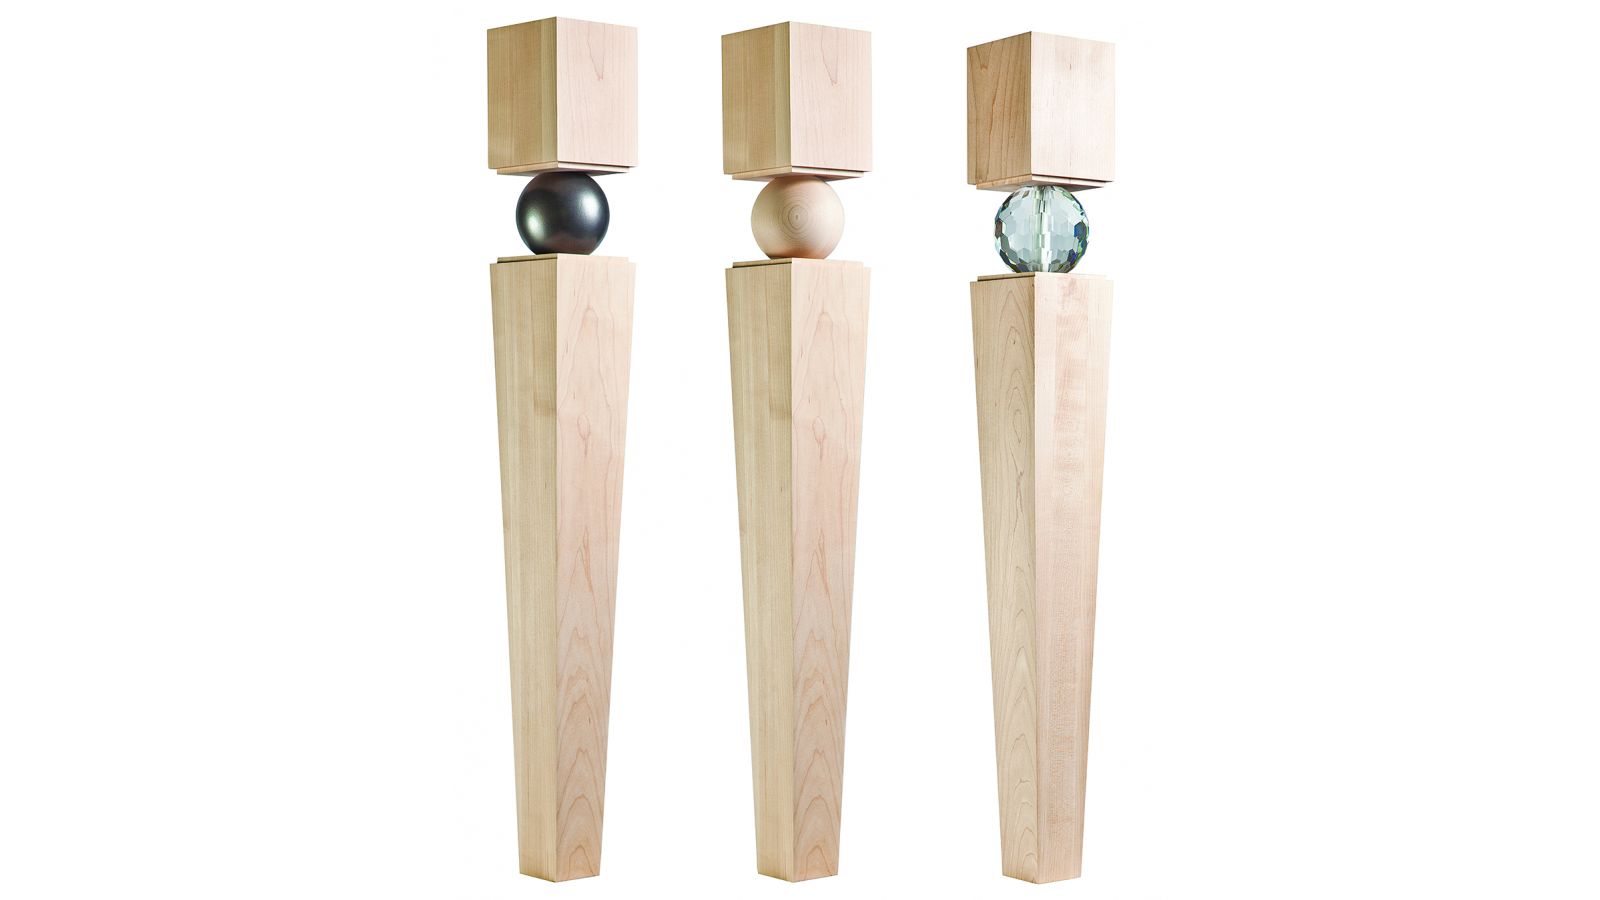 AFE-ORB legs from Multiplicity Collection